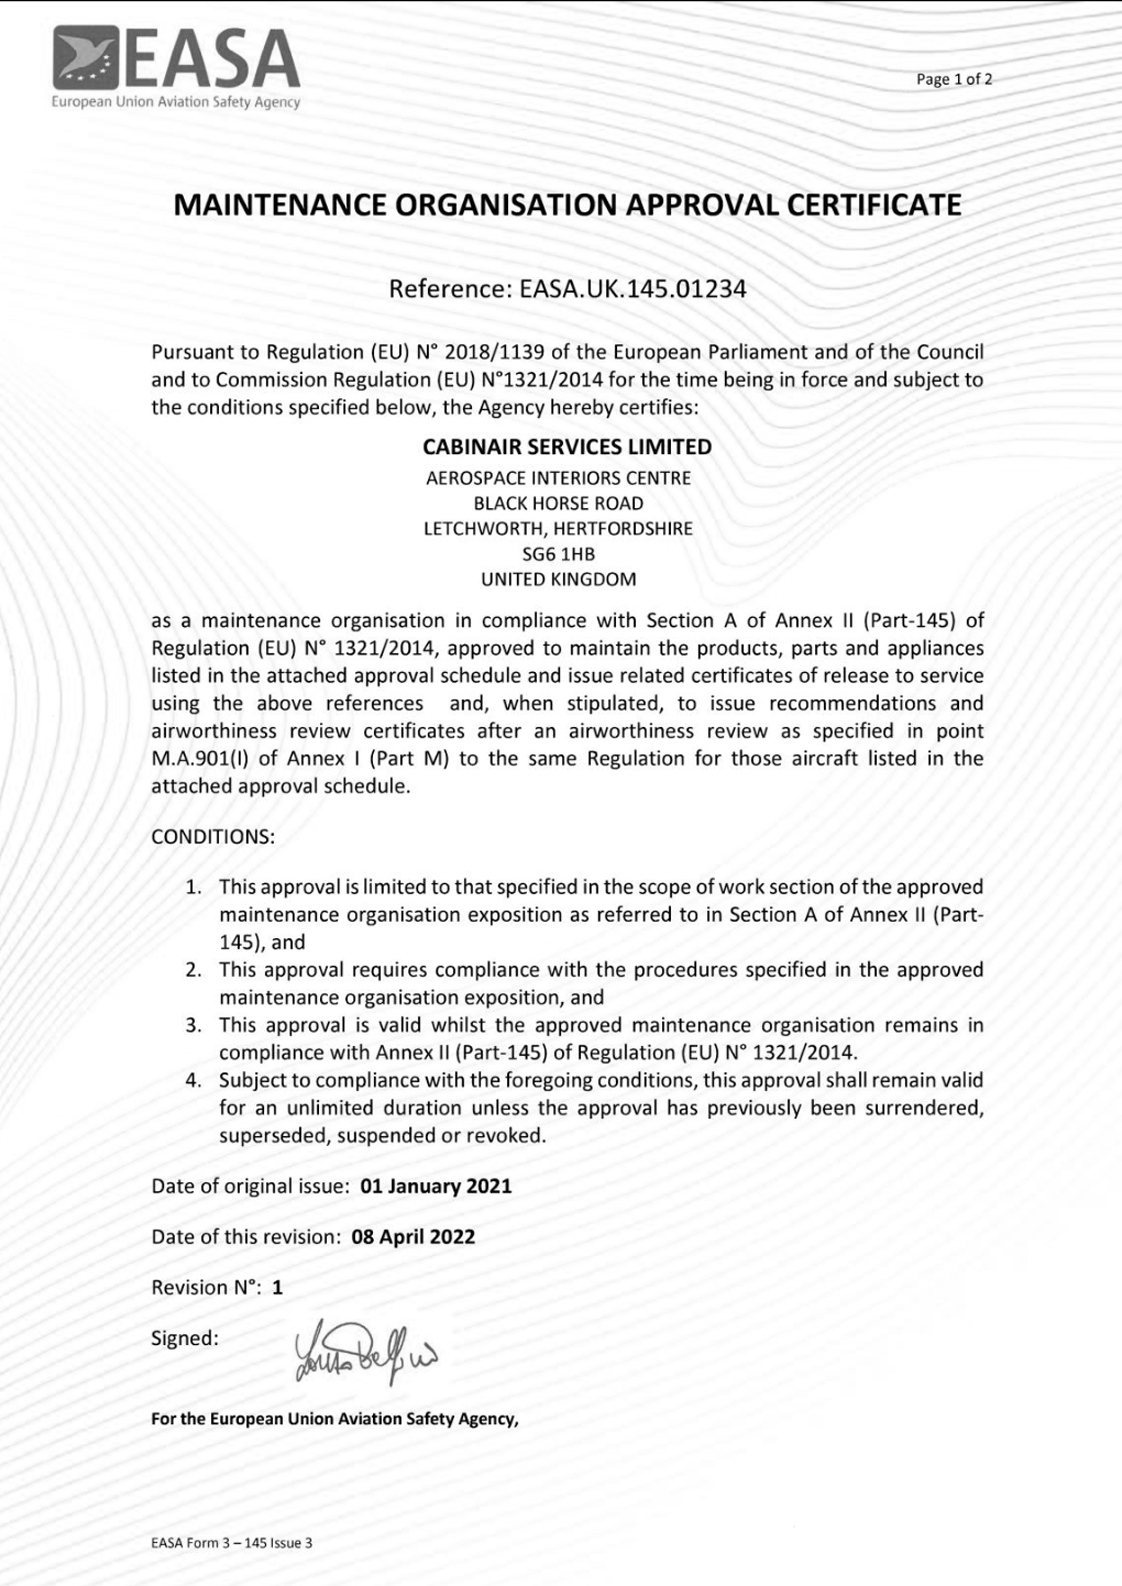 EASA-Part-145-approval